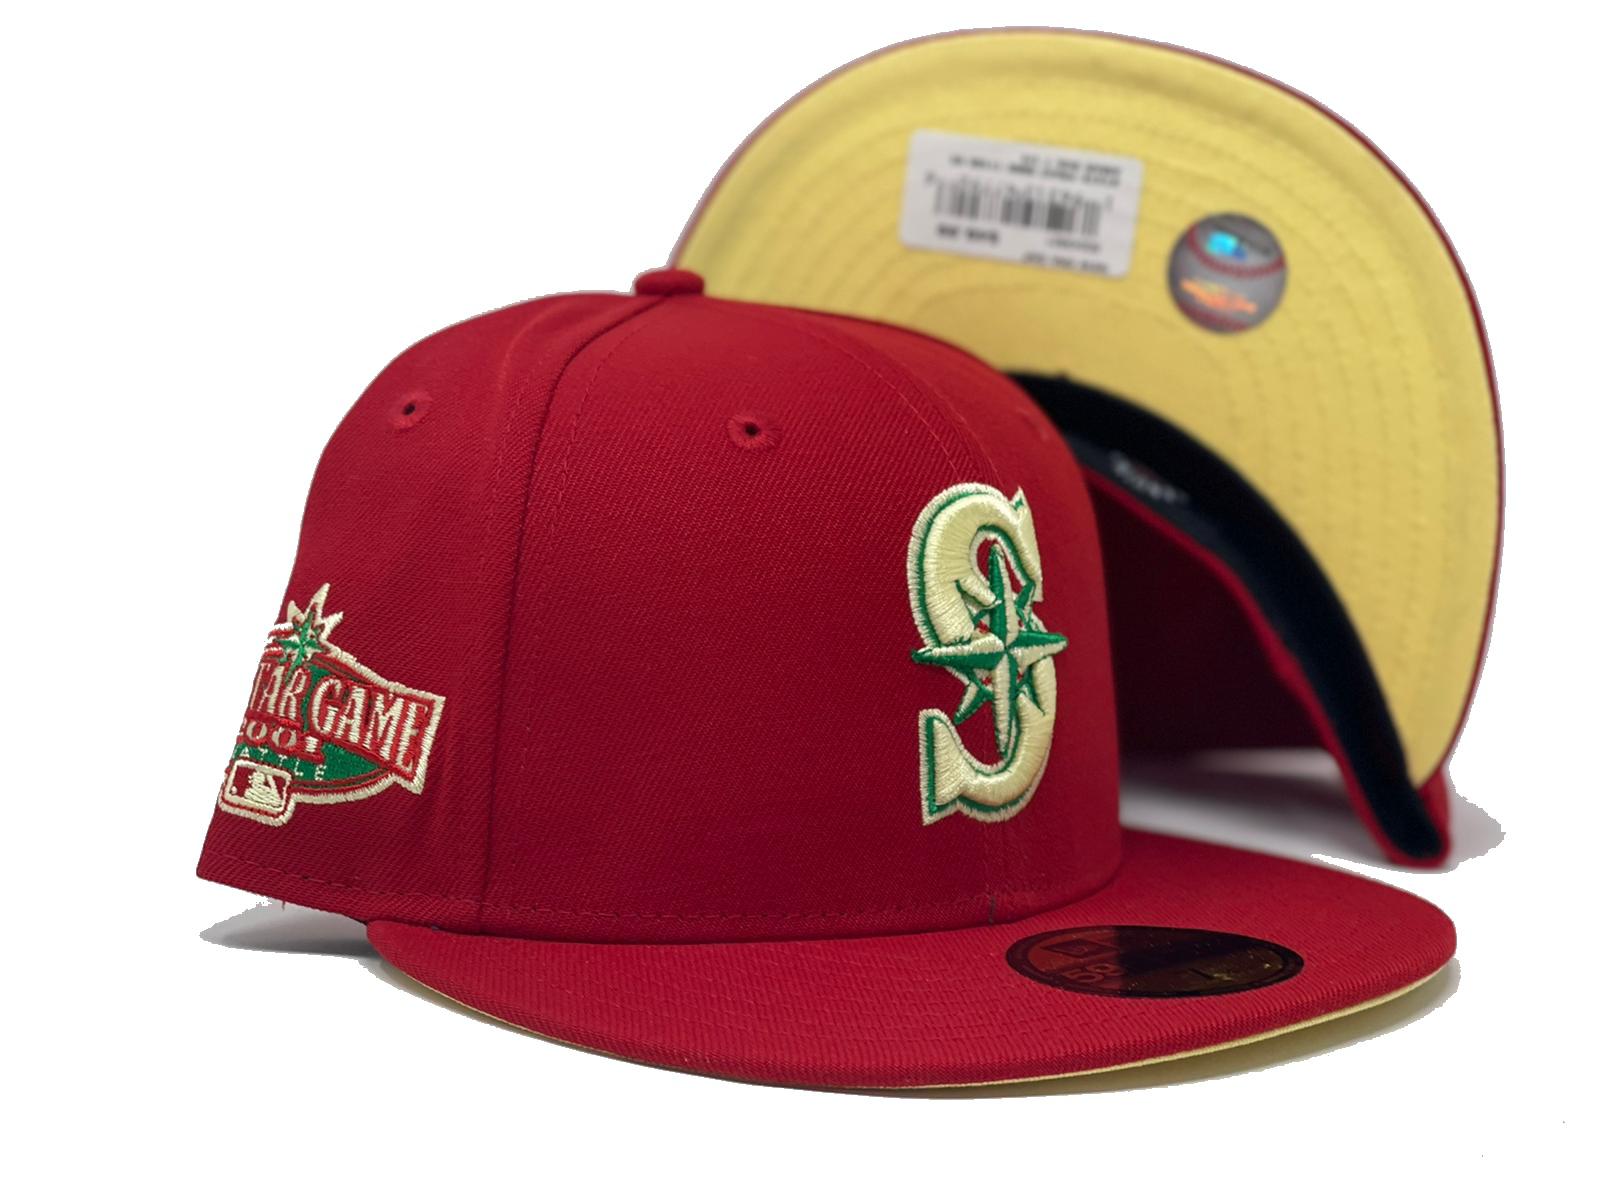 Mariners City Connect Hat - Zerelam